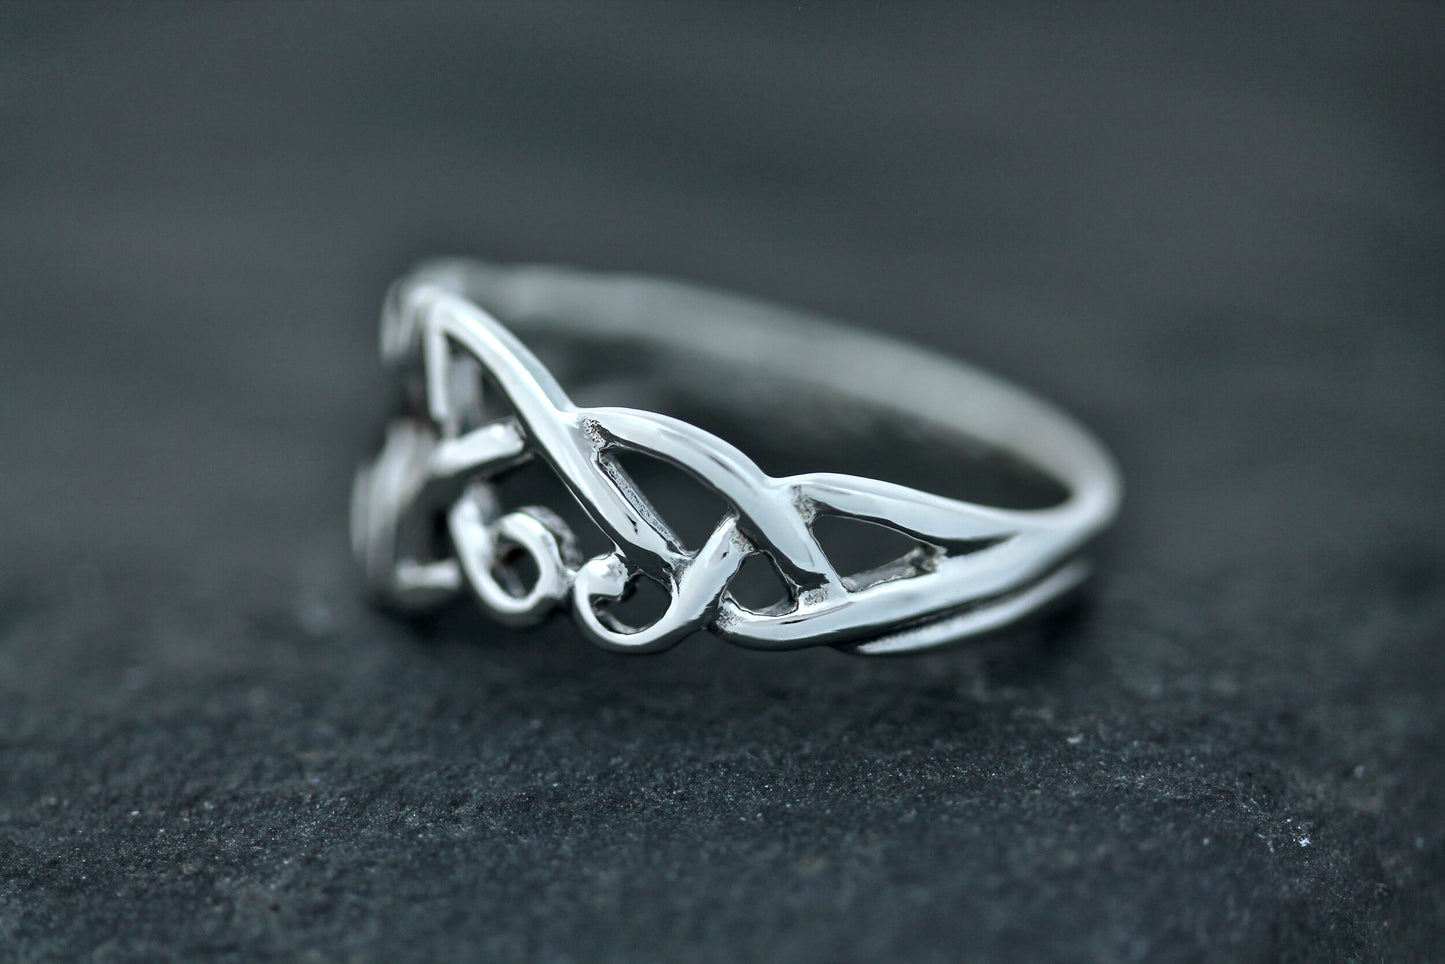 Triquetra Ring - Complexed Trinity Union